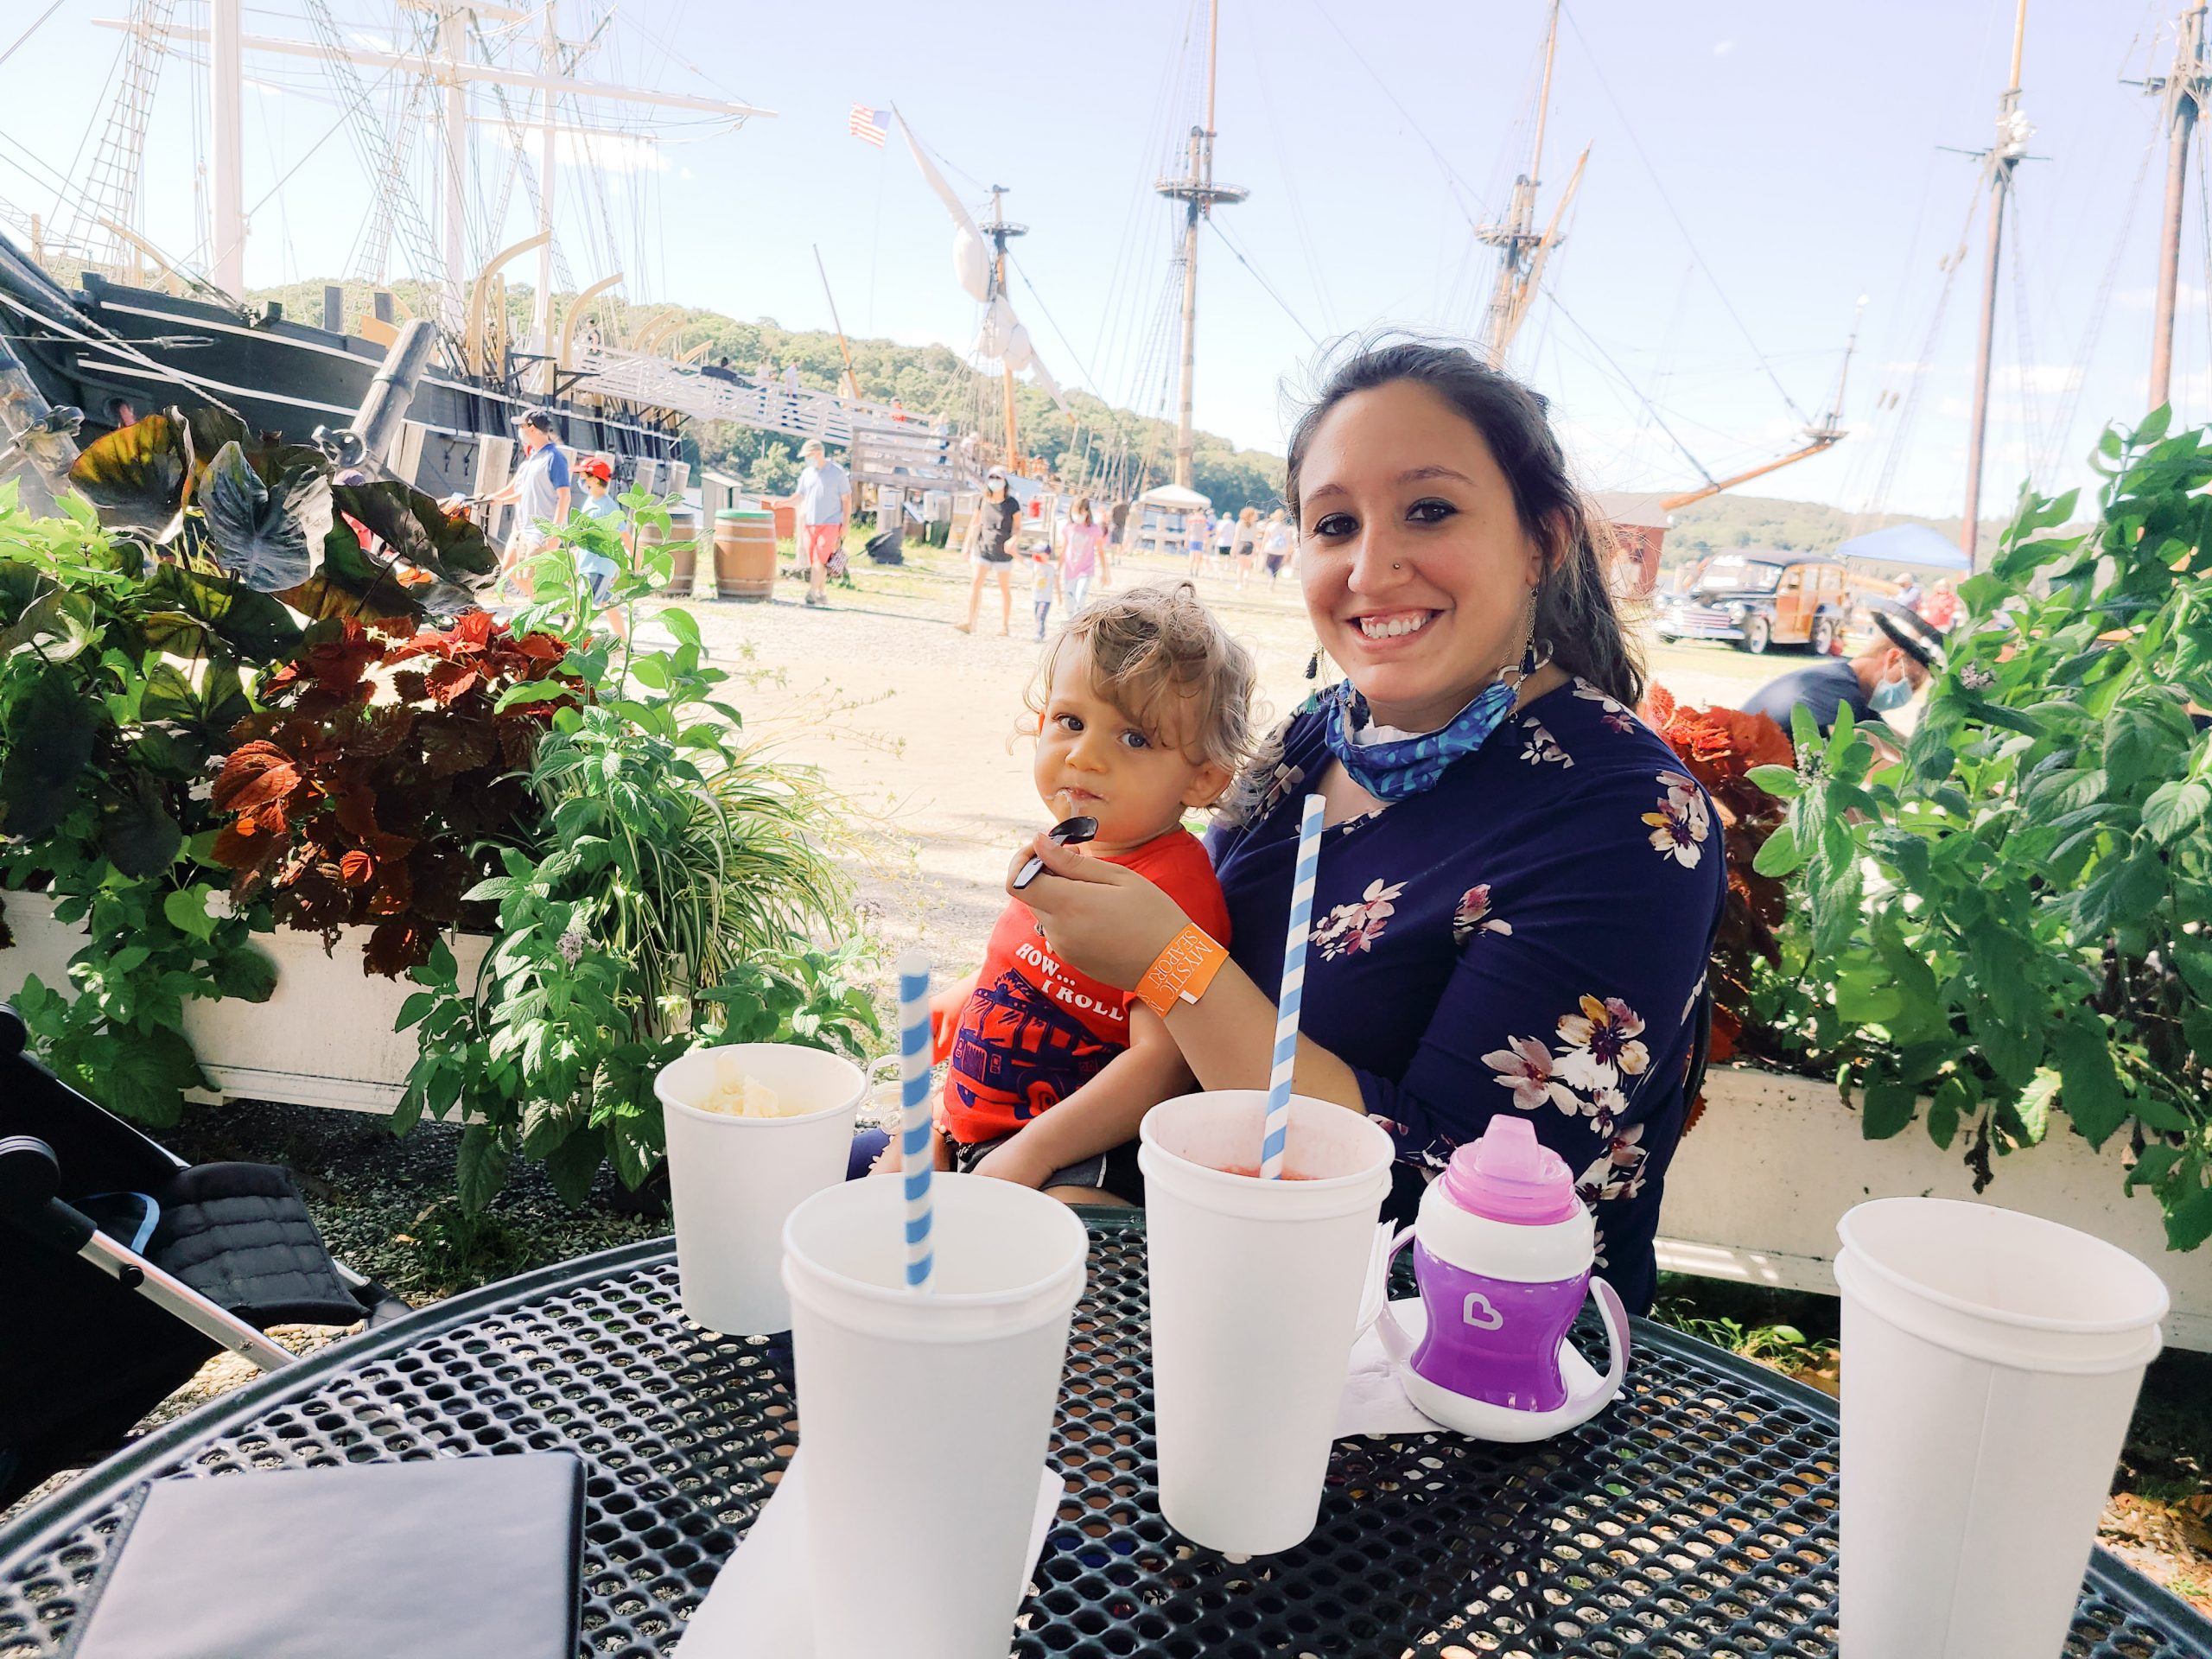 A woman and child sit at a table enjoying beverages at the Seasport Museum